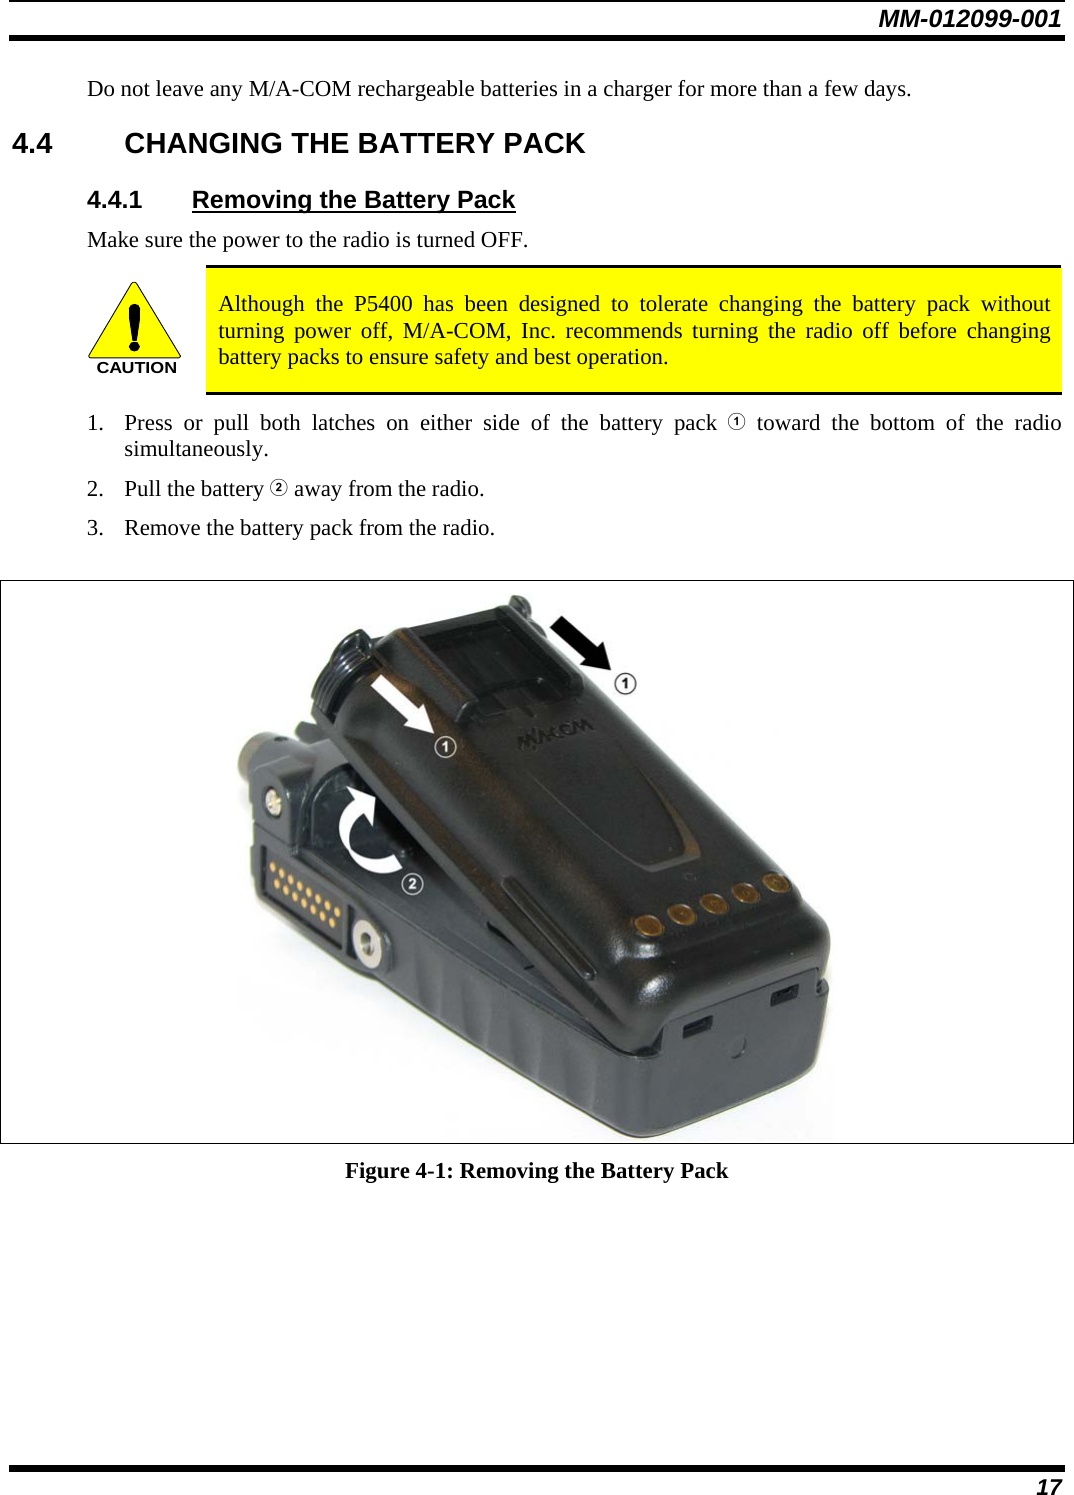 MM-012099-001 17 Do not leave any M/A-COM rechargeable batteries in a charger for more than a few days.  4.4  CHANGING THE BATTERY PACK 4.4.1  Removing the Battery Pack Make sure the power to the radio is turned OFF. CAUTION Although the P5400 has been designed to tolerate changing the battery pack without turning power off, M/A-COM, Inc. recommends turning the radio off before changing battery packs to ensure safety and best operation. 1. Press or pull both latches on either side of the battery pack  toward the bottom of the radio simultaneously.  2. Pull the battery  away from the radio. 3. Remove the battery pack from the radio.   Figure 4-1: Removing the Battery Pack 